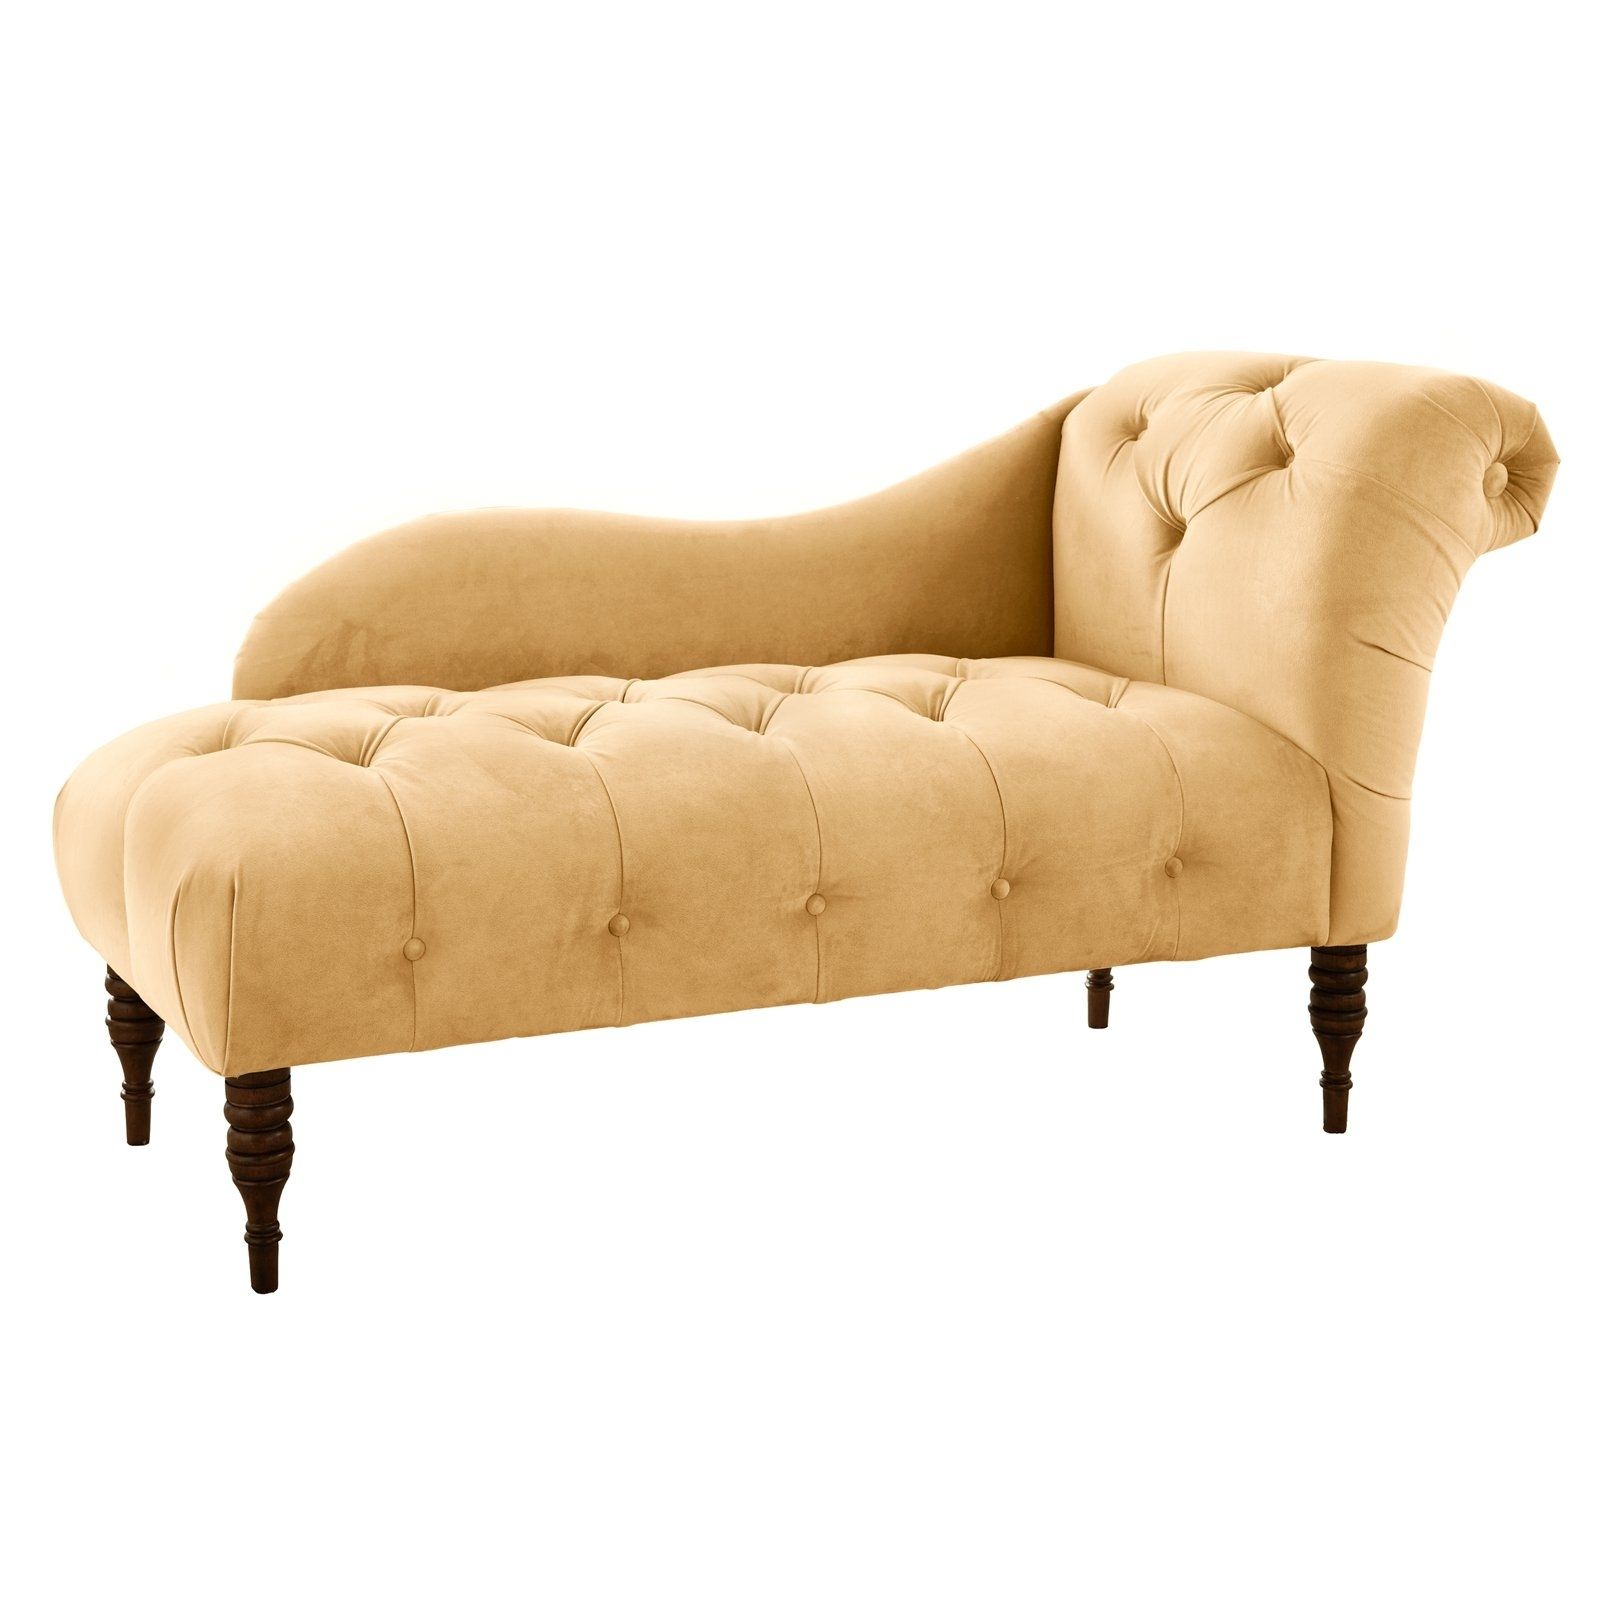 Tufted Chaise Lounge Chairs Intended For Famous Madison Tufted Chaise Lounge (View 2 of 15)